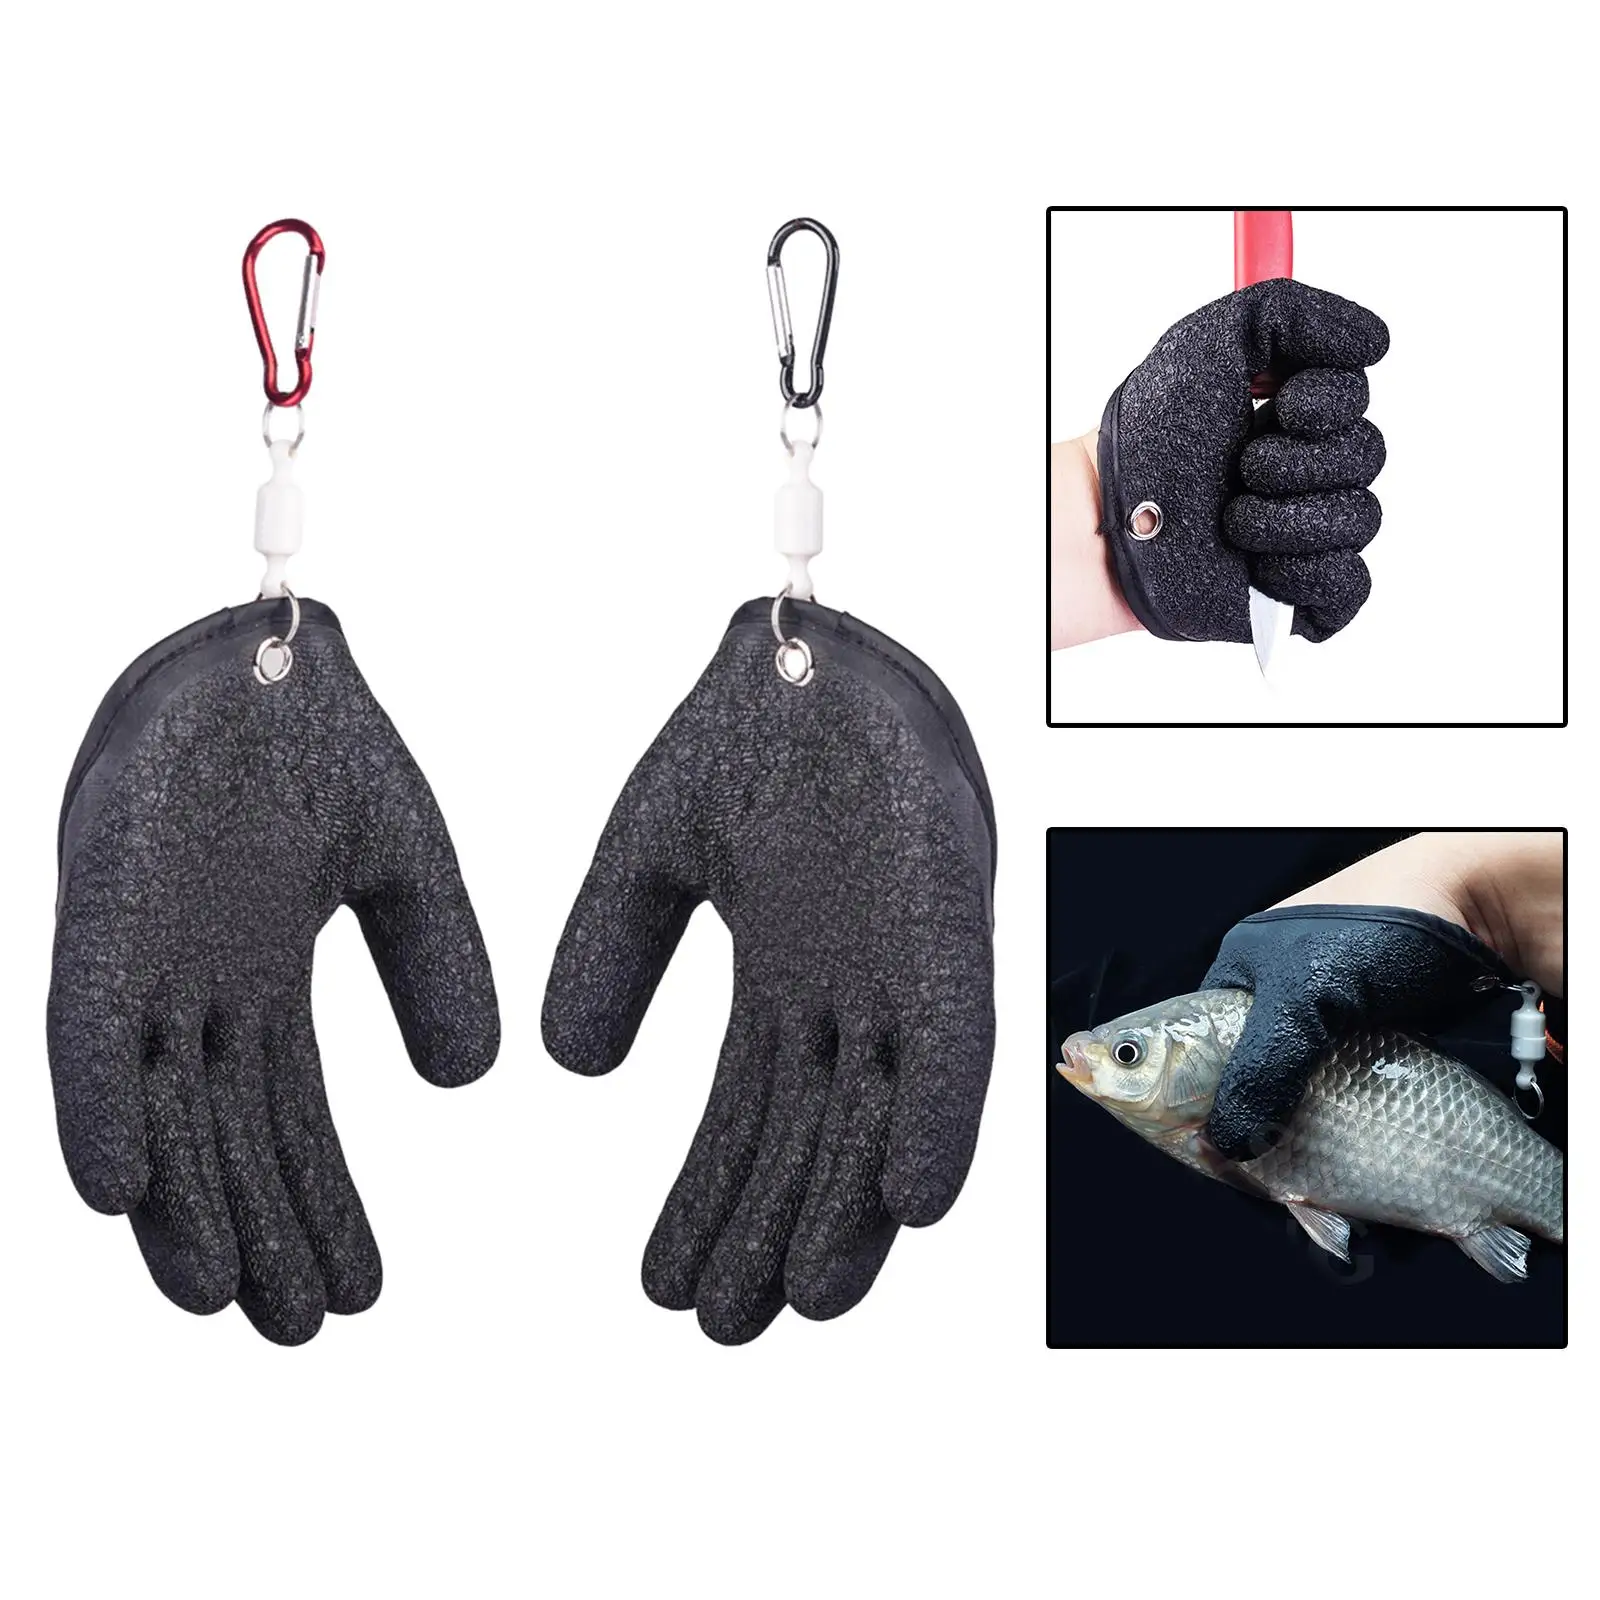  Magnetism Fisherman Professional Catch Fish s Multifunctional Anti-Slip Hunting  Left Hand with Magnetism Release Buckle